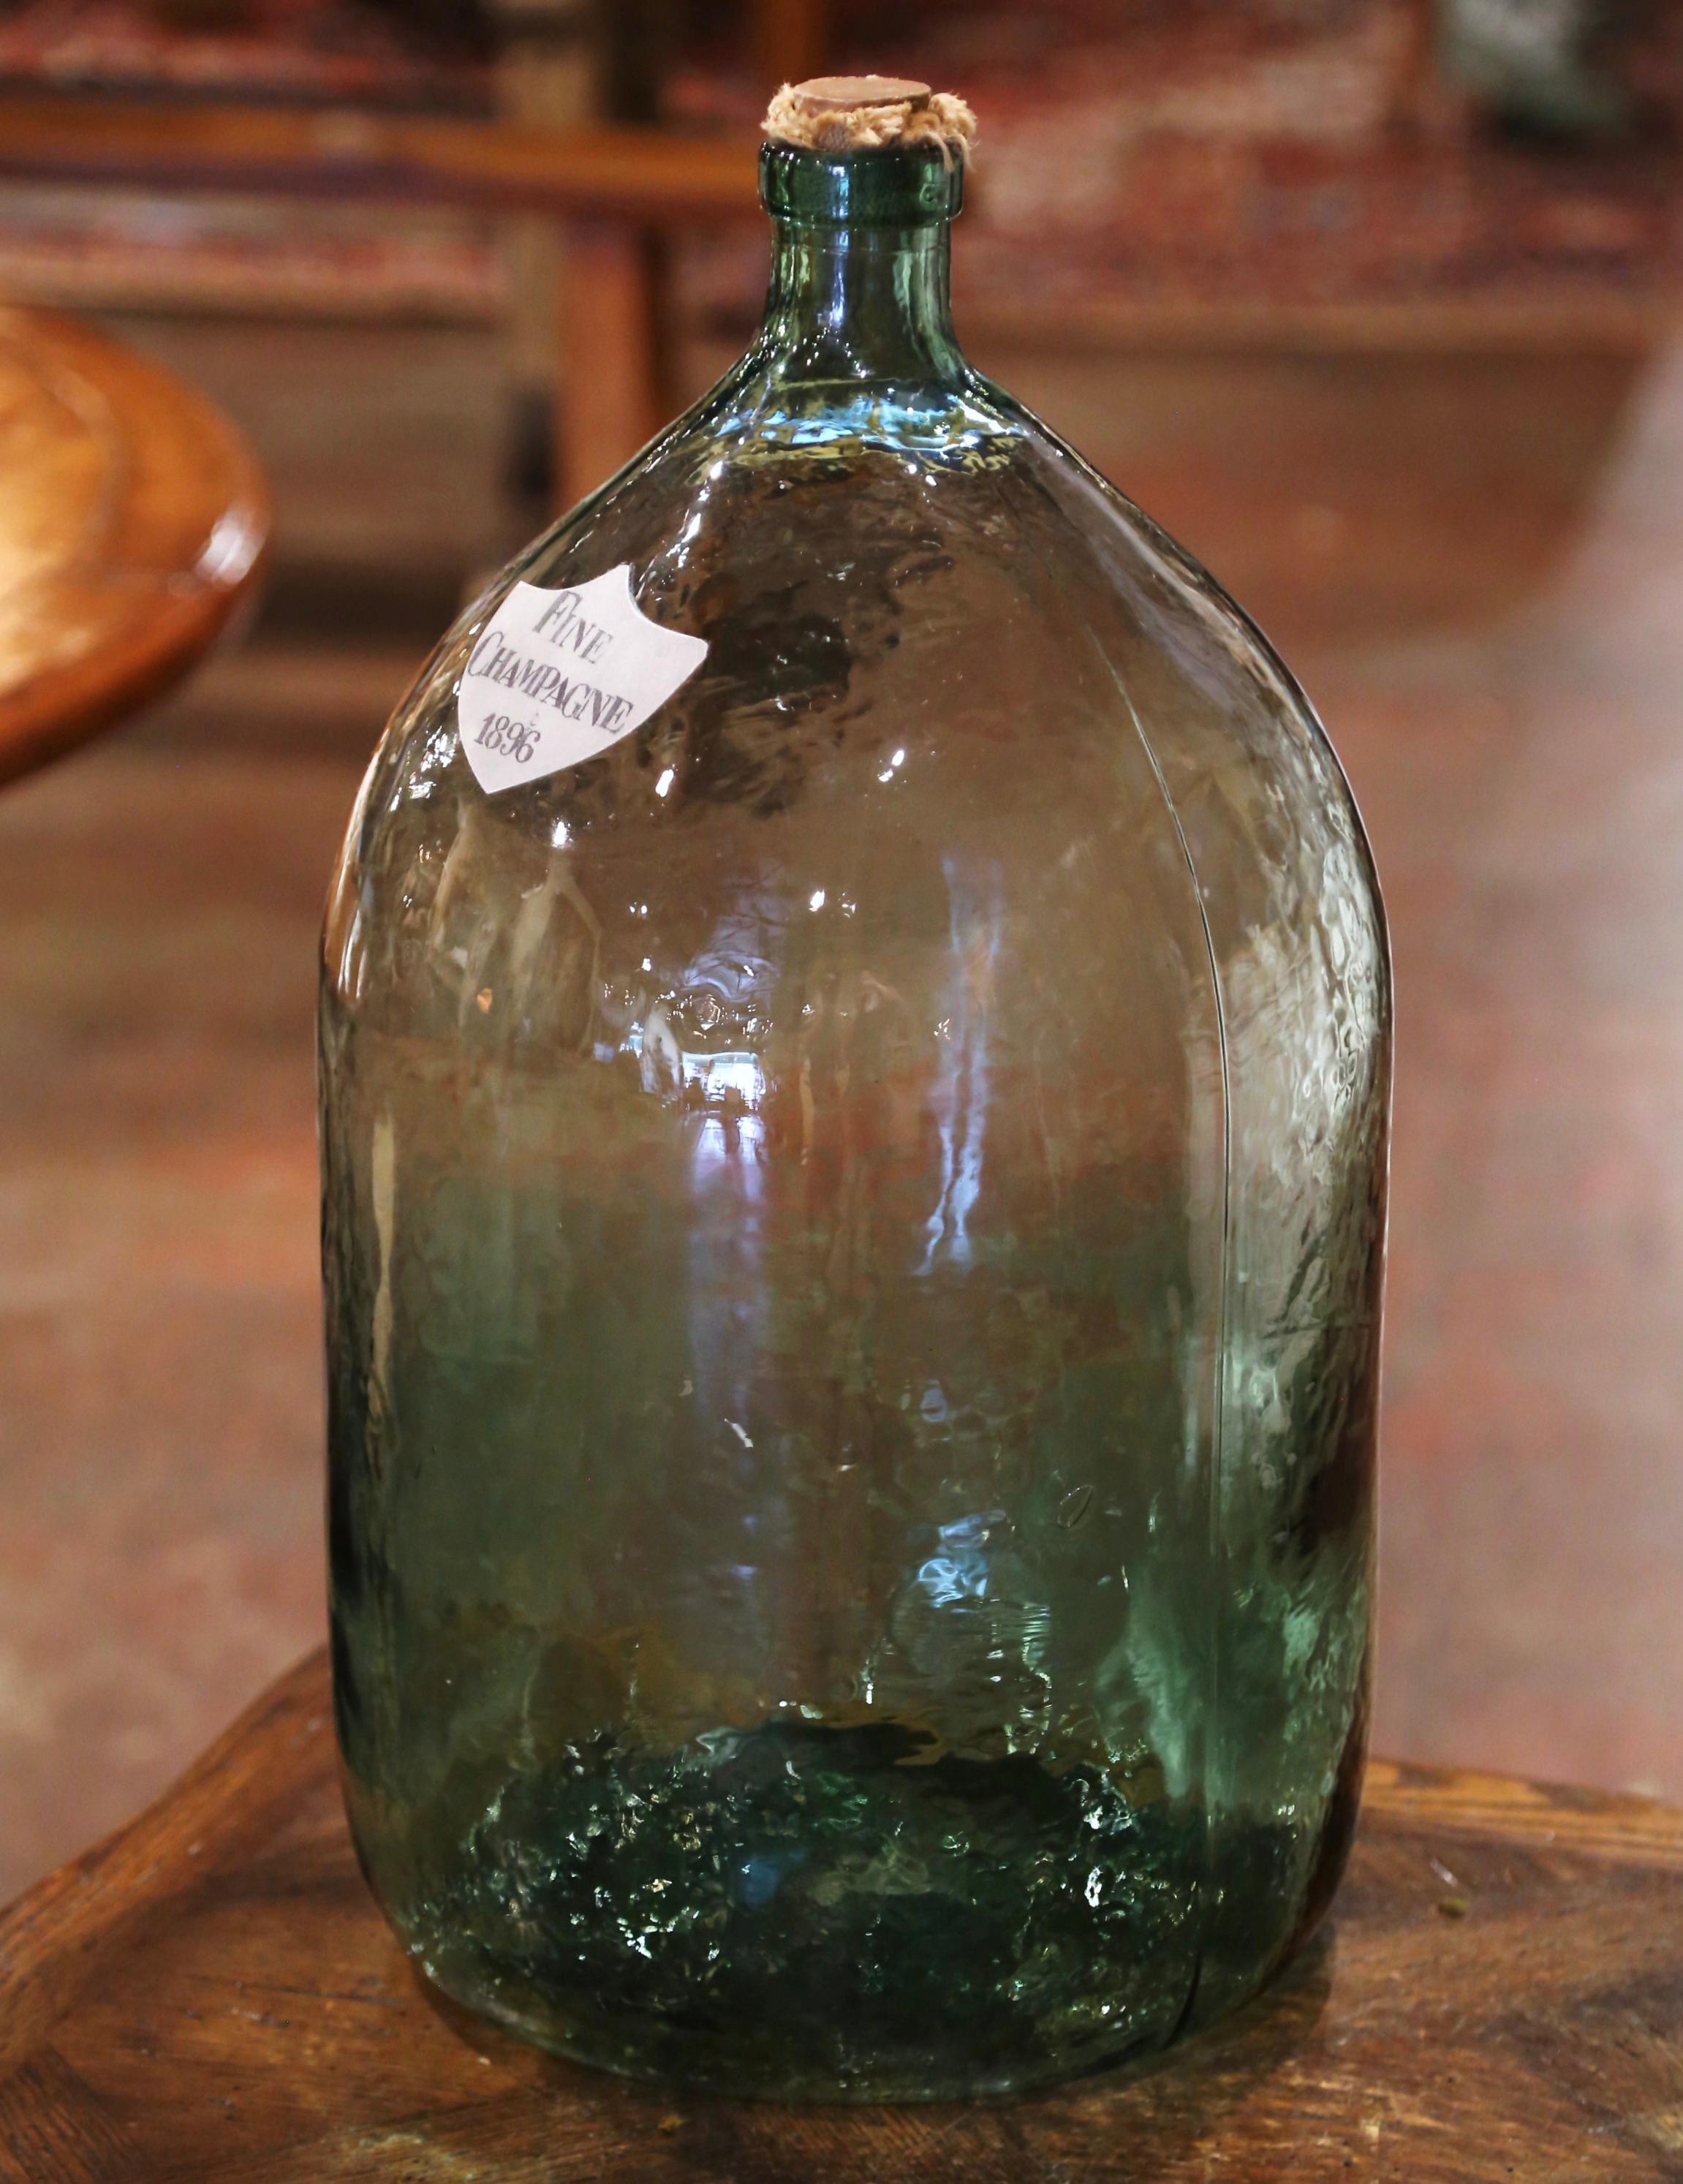 Store your wine corks in this Classic French wine bottle! Hand blown in France, this tall glass bottle with green shade features stamped 